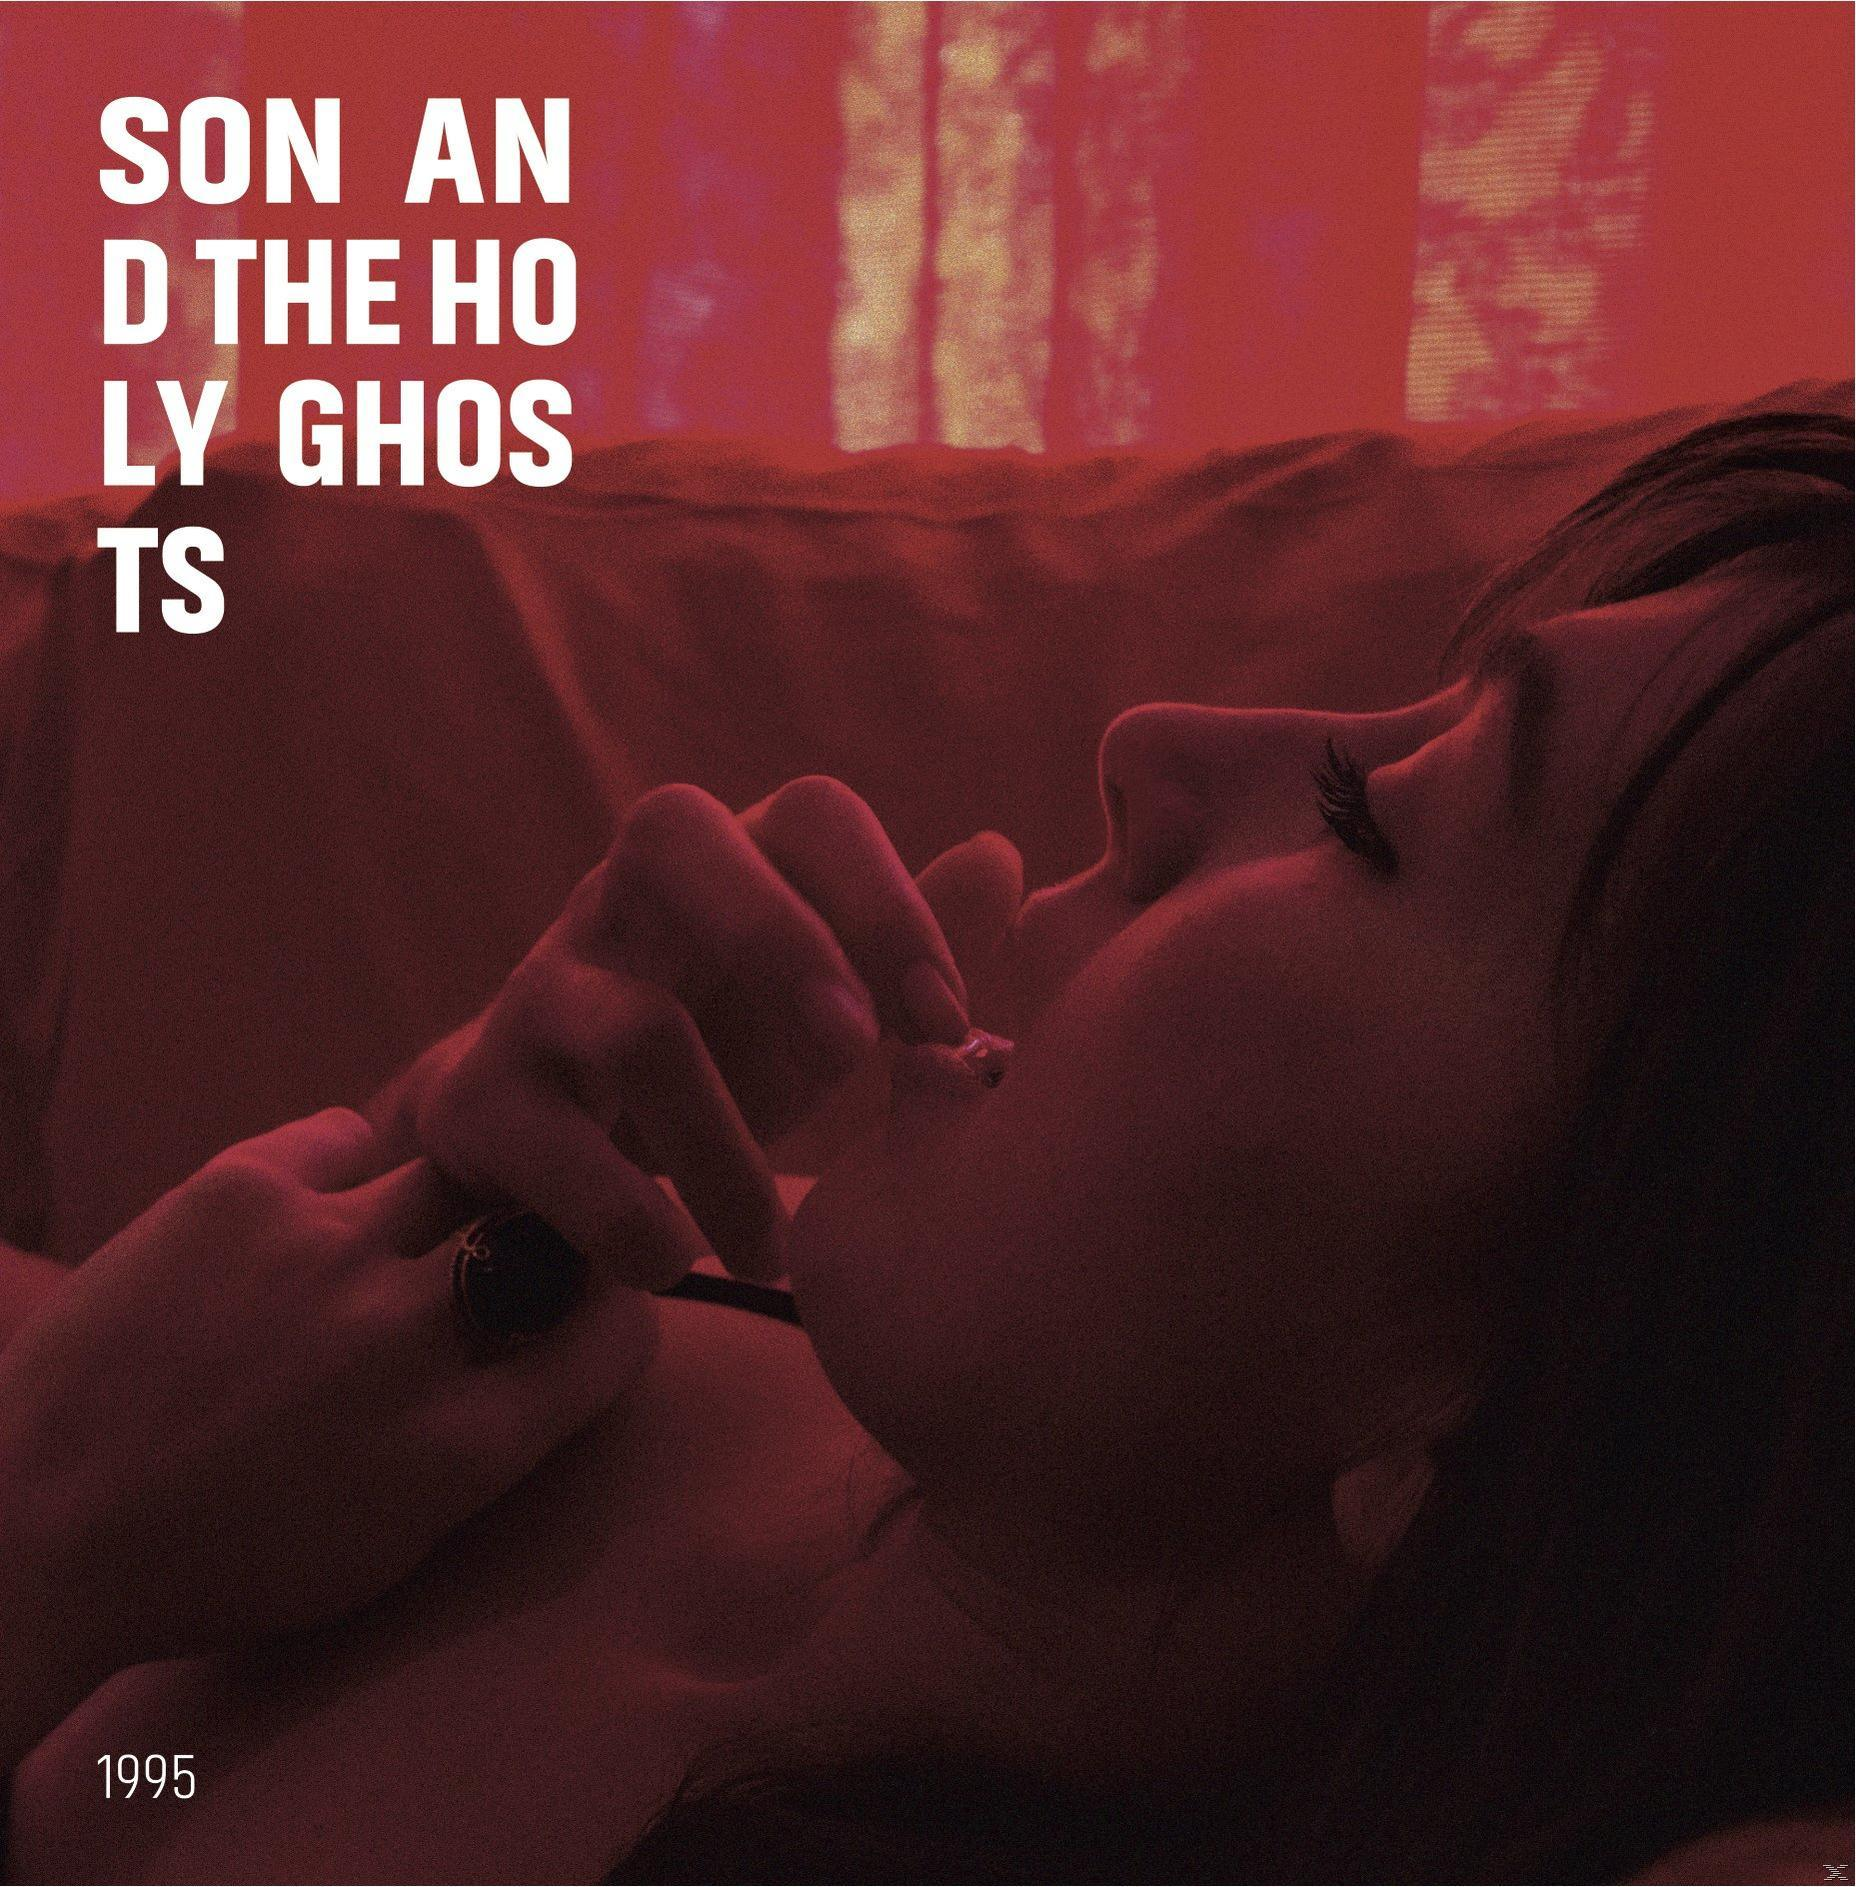 Son And The Holy 1995 (Vinyl) - - Ghosts